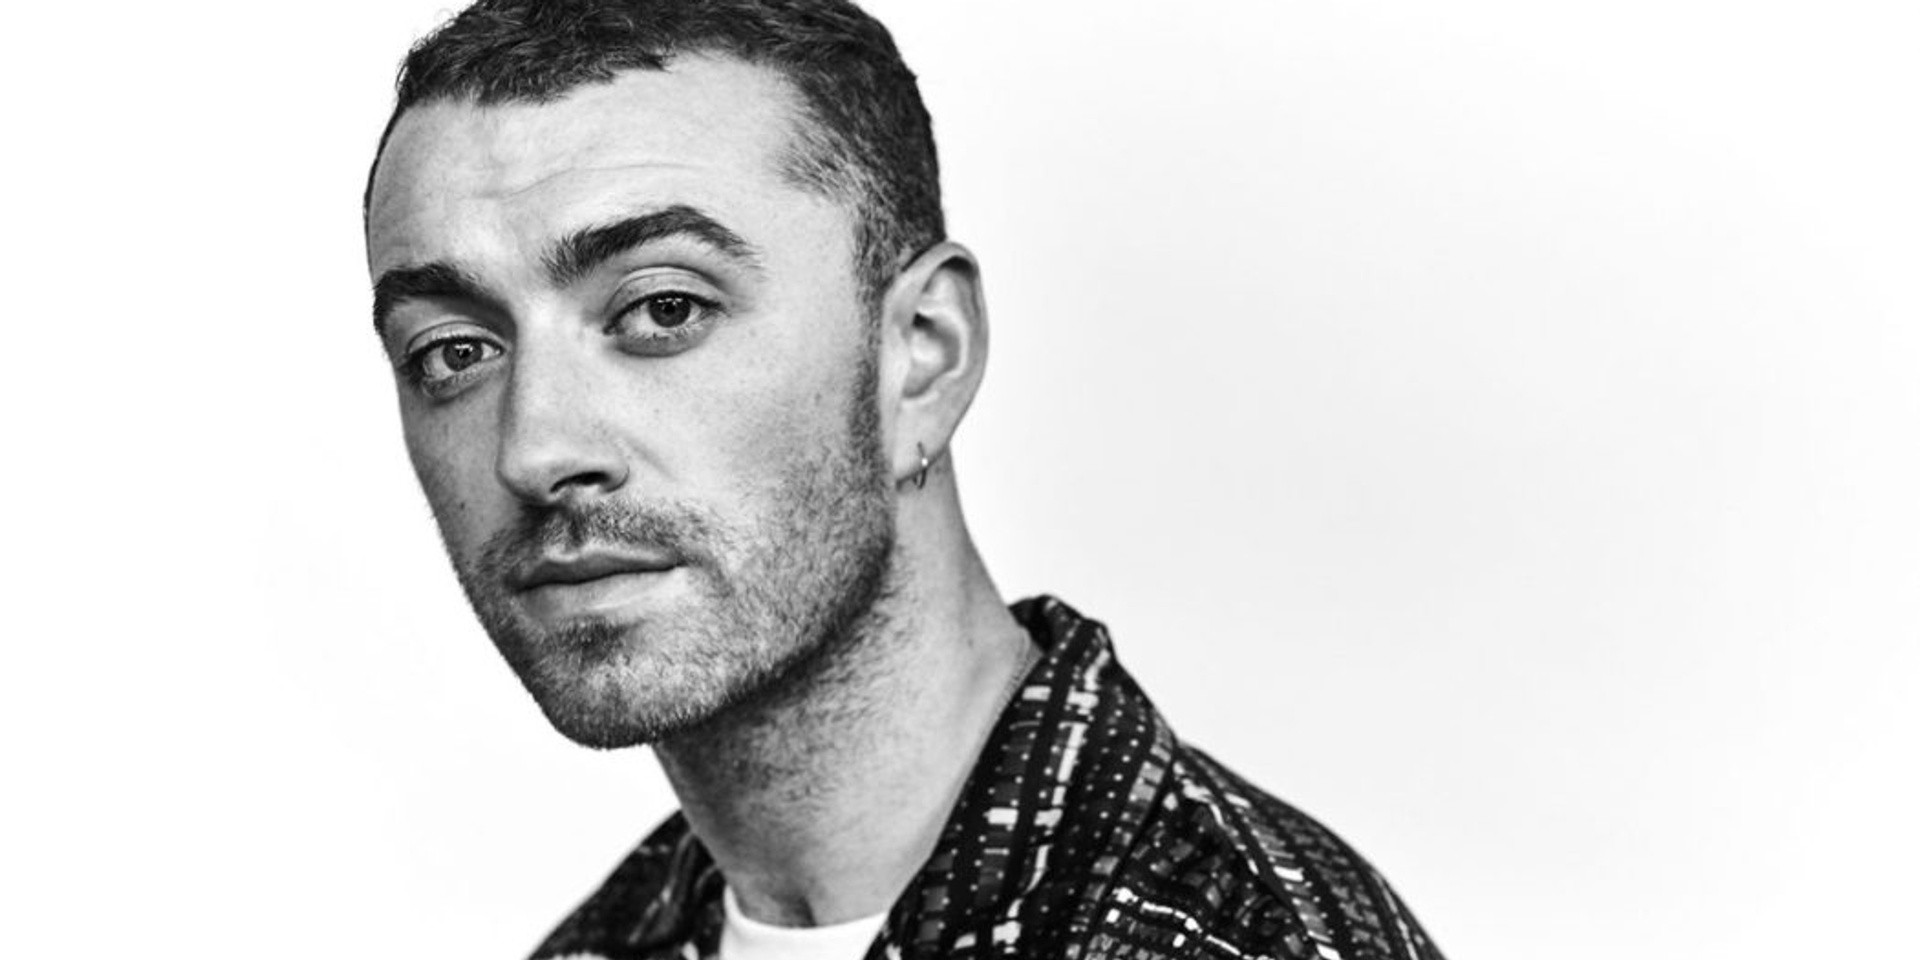 BREAKING: Sam Smith to perform for the first time in Singapore this October